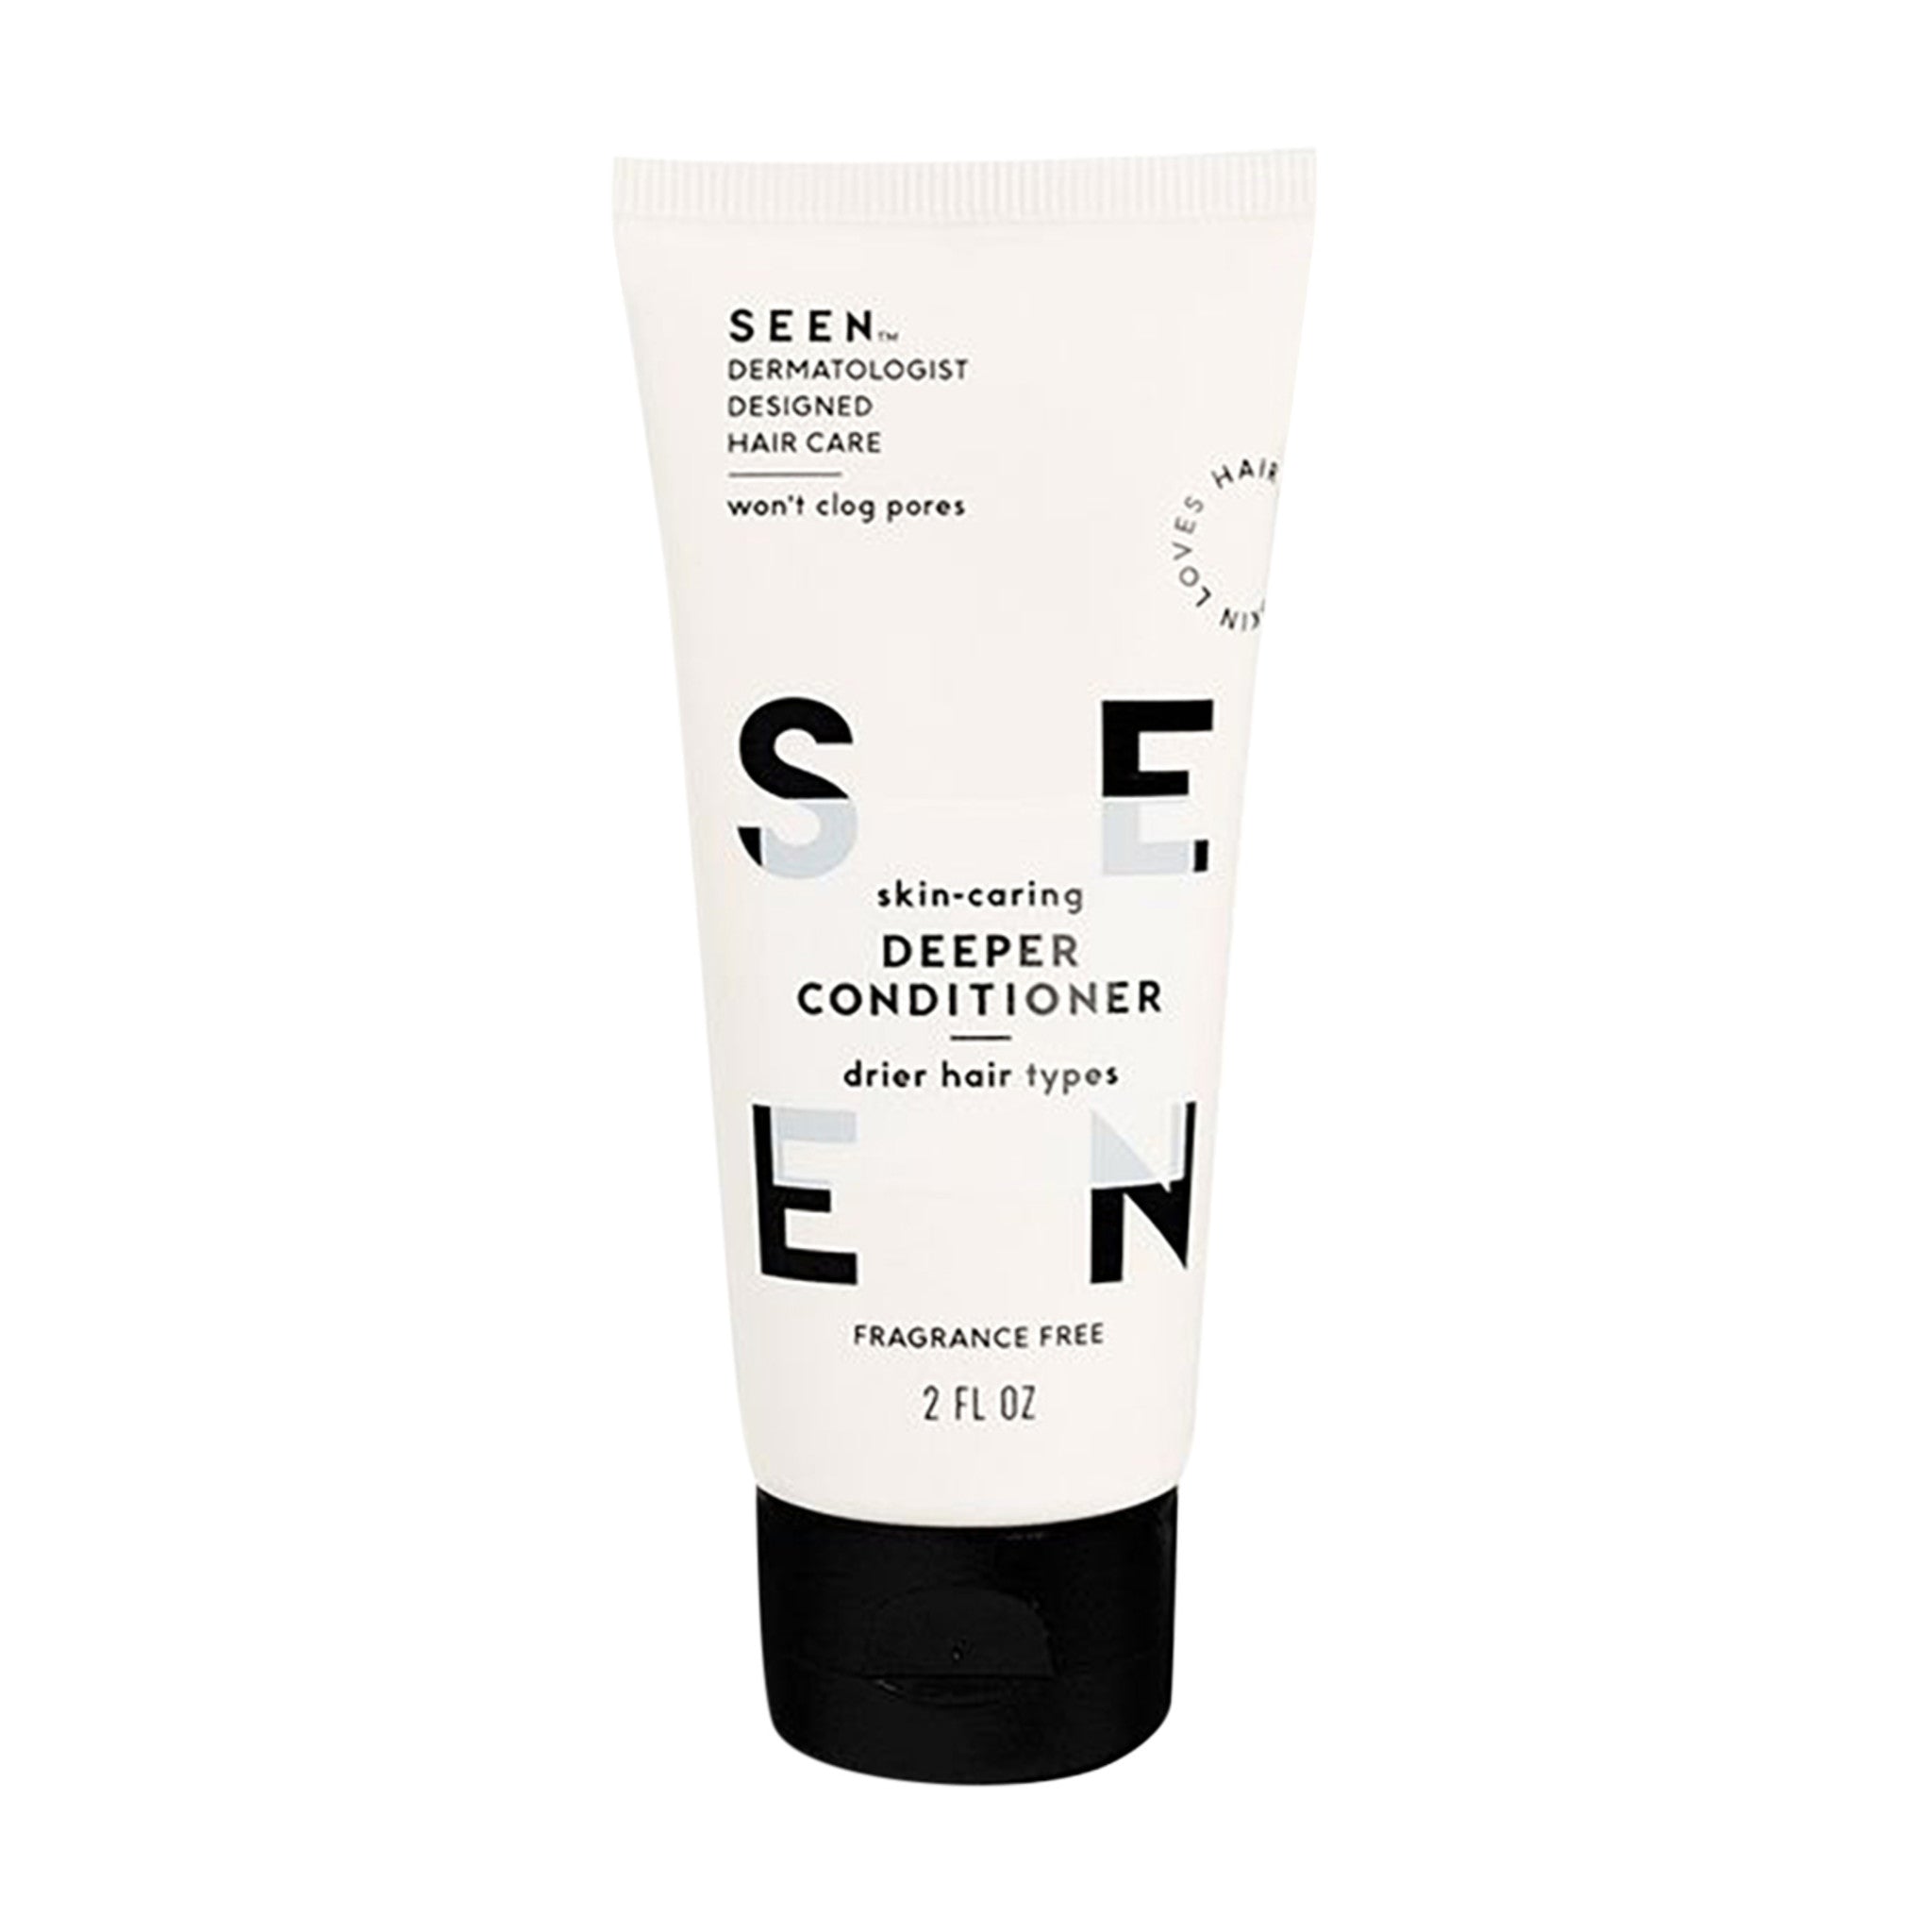 Seen Deeper Conditioner Fragrance-Free Size variant: 2 oz main image.